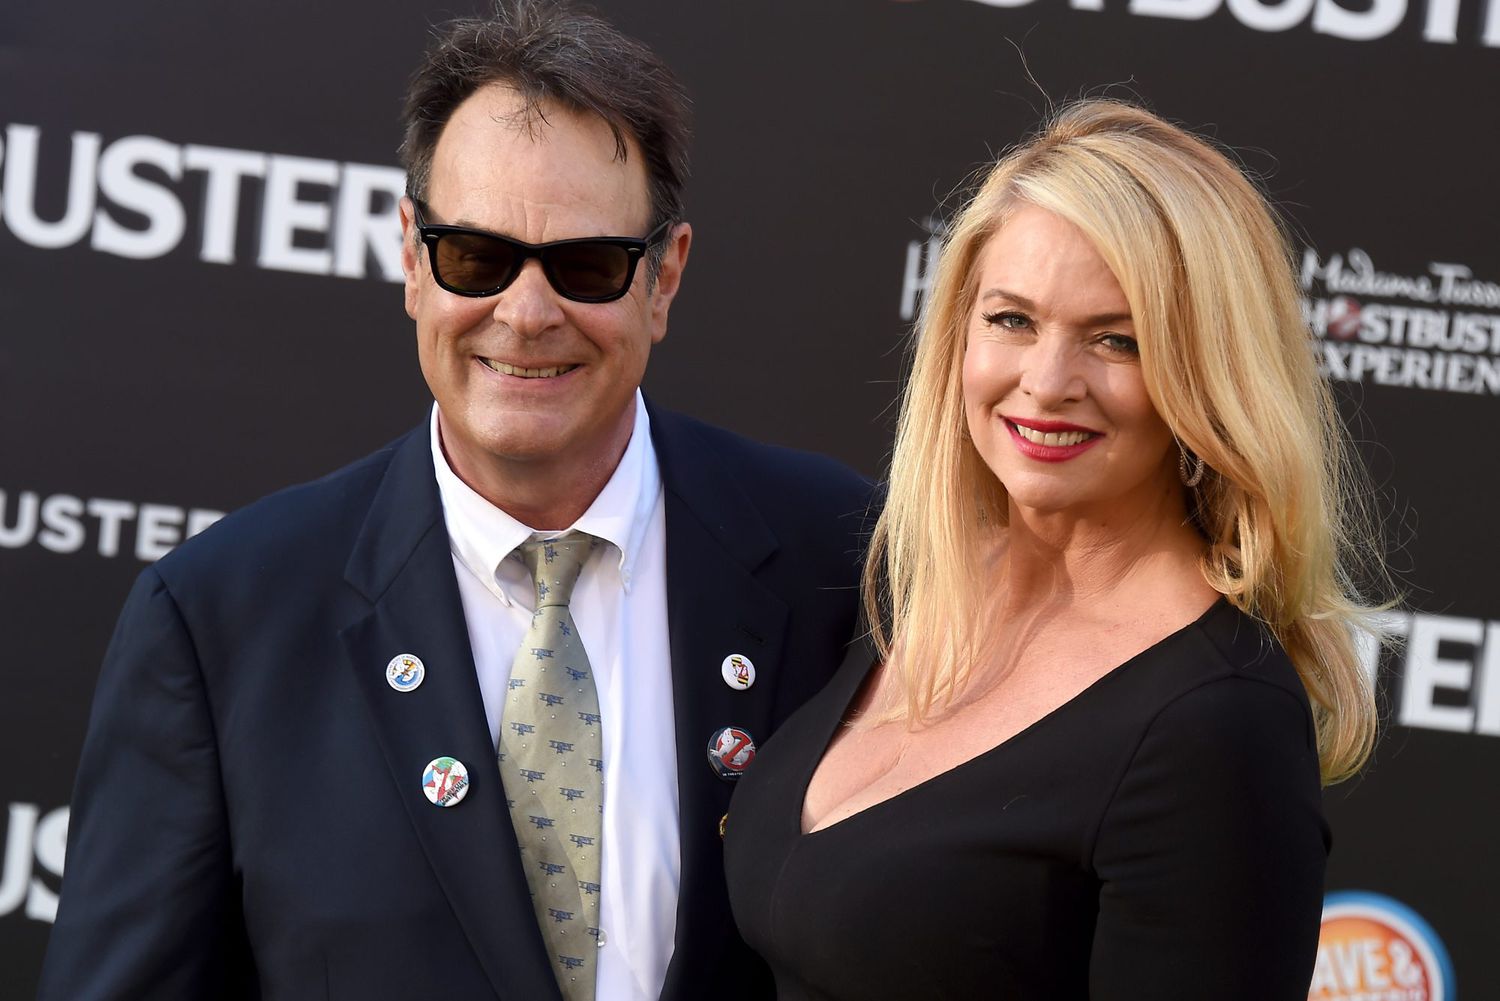 HOLLYWOOD, CA - JULY 09: Actors Dan Aykroyd and Donna Dixon arrive at the premiere of Sony Pictures' "Ghostbusters" at TCL Chinese Theatre on July 9, 2016 in Hollywood, California. (Photo by Gregg DeGuire/WireImage)